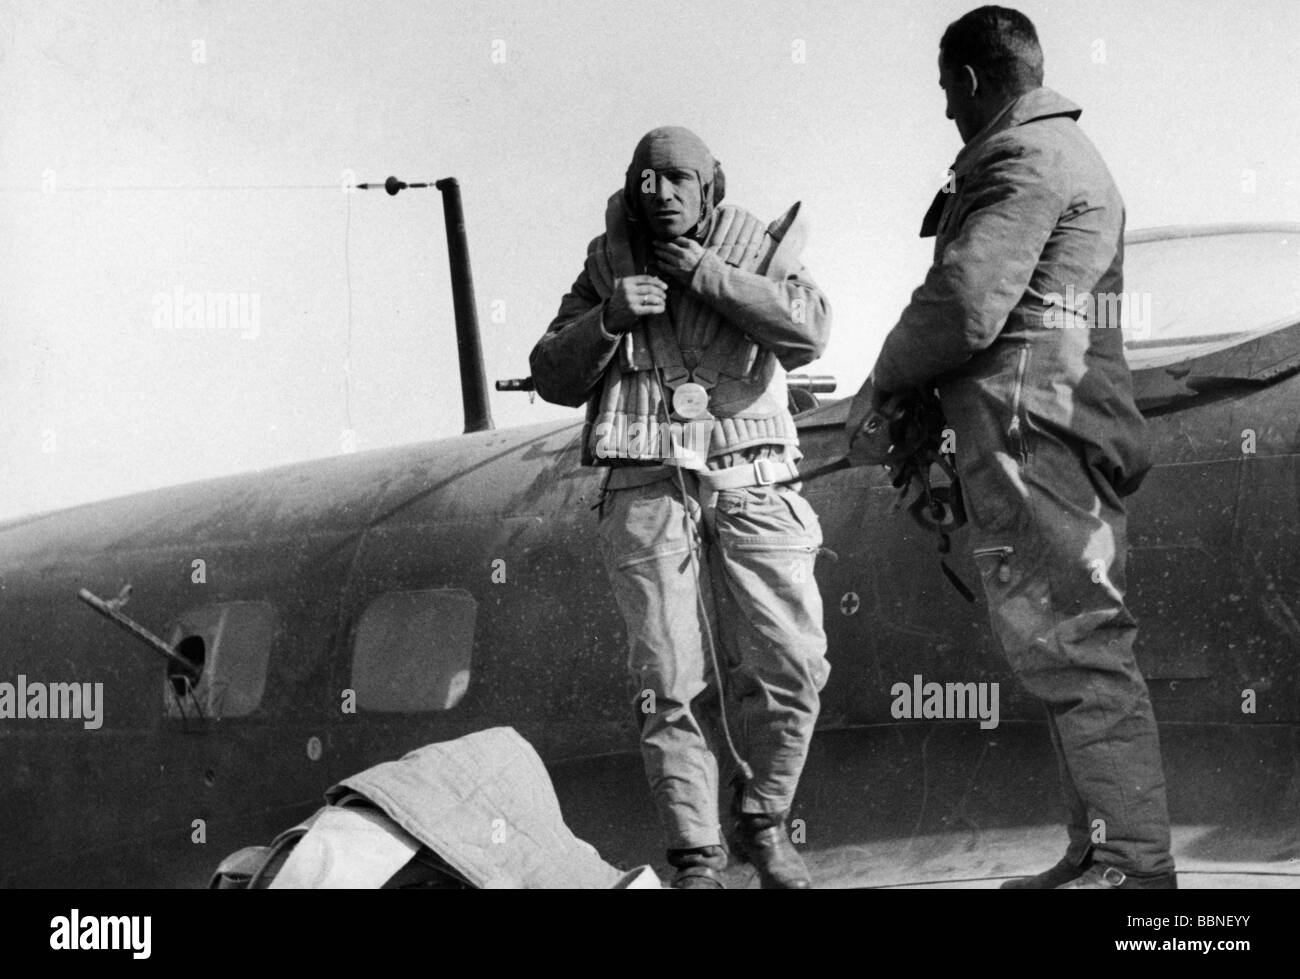 events, Second World War / WWII, aerial warfare, persons, German bomber Heinkel He 111 back from a mission, crew members on the wing, circa 1941, 20th century, historic, historical, Luftwaffe, Wehrmacht, Germany, Third Reich, soldier, soldiers, aviator, aviators, Germany, pilots, uniform, uniforms, flying suit, cap, caps, life vest, vests, air jacket, jackets, He111, He-111, pilot, pilots, people, 1940s, Stock Photo